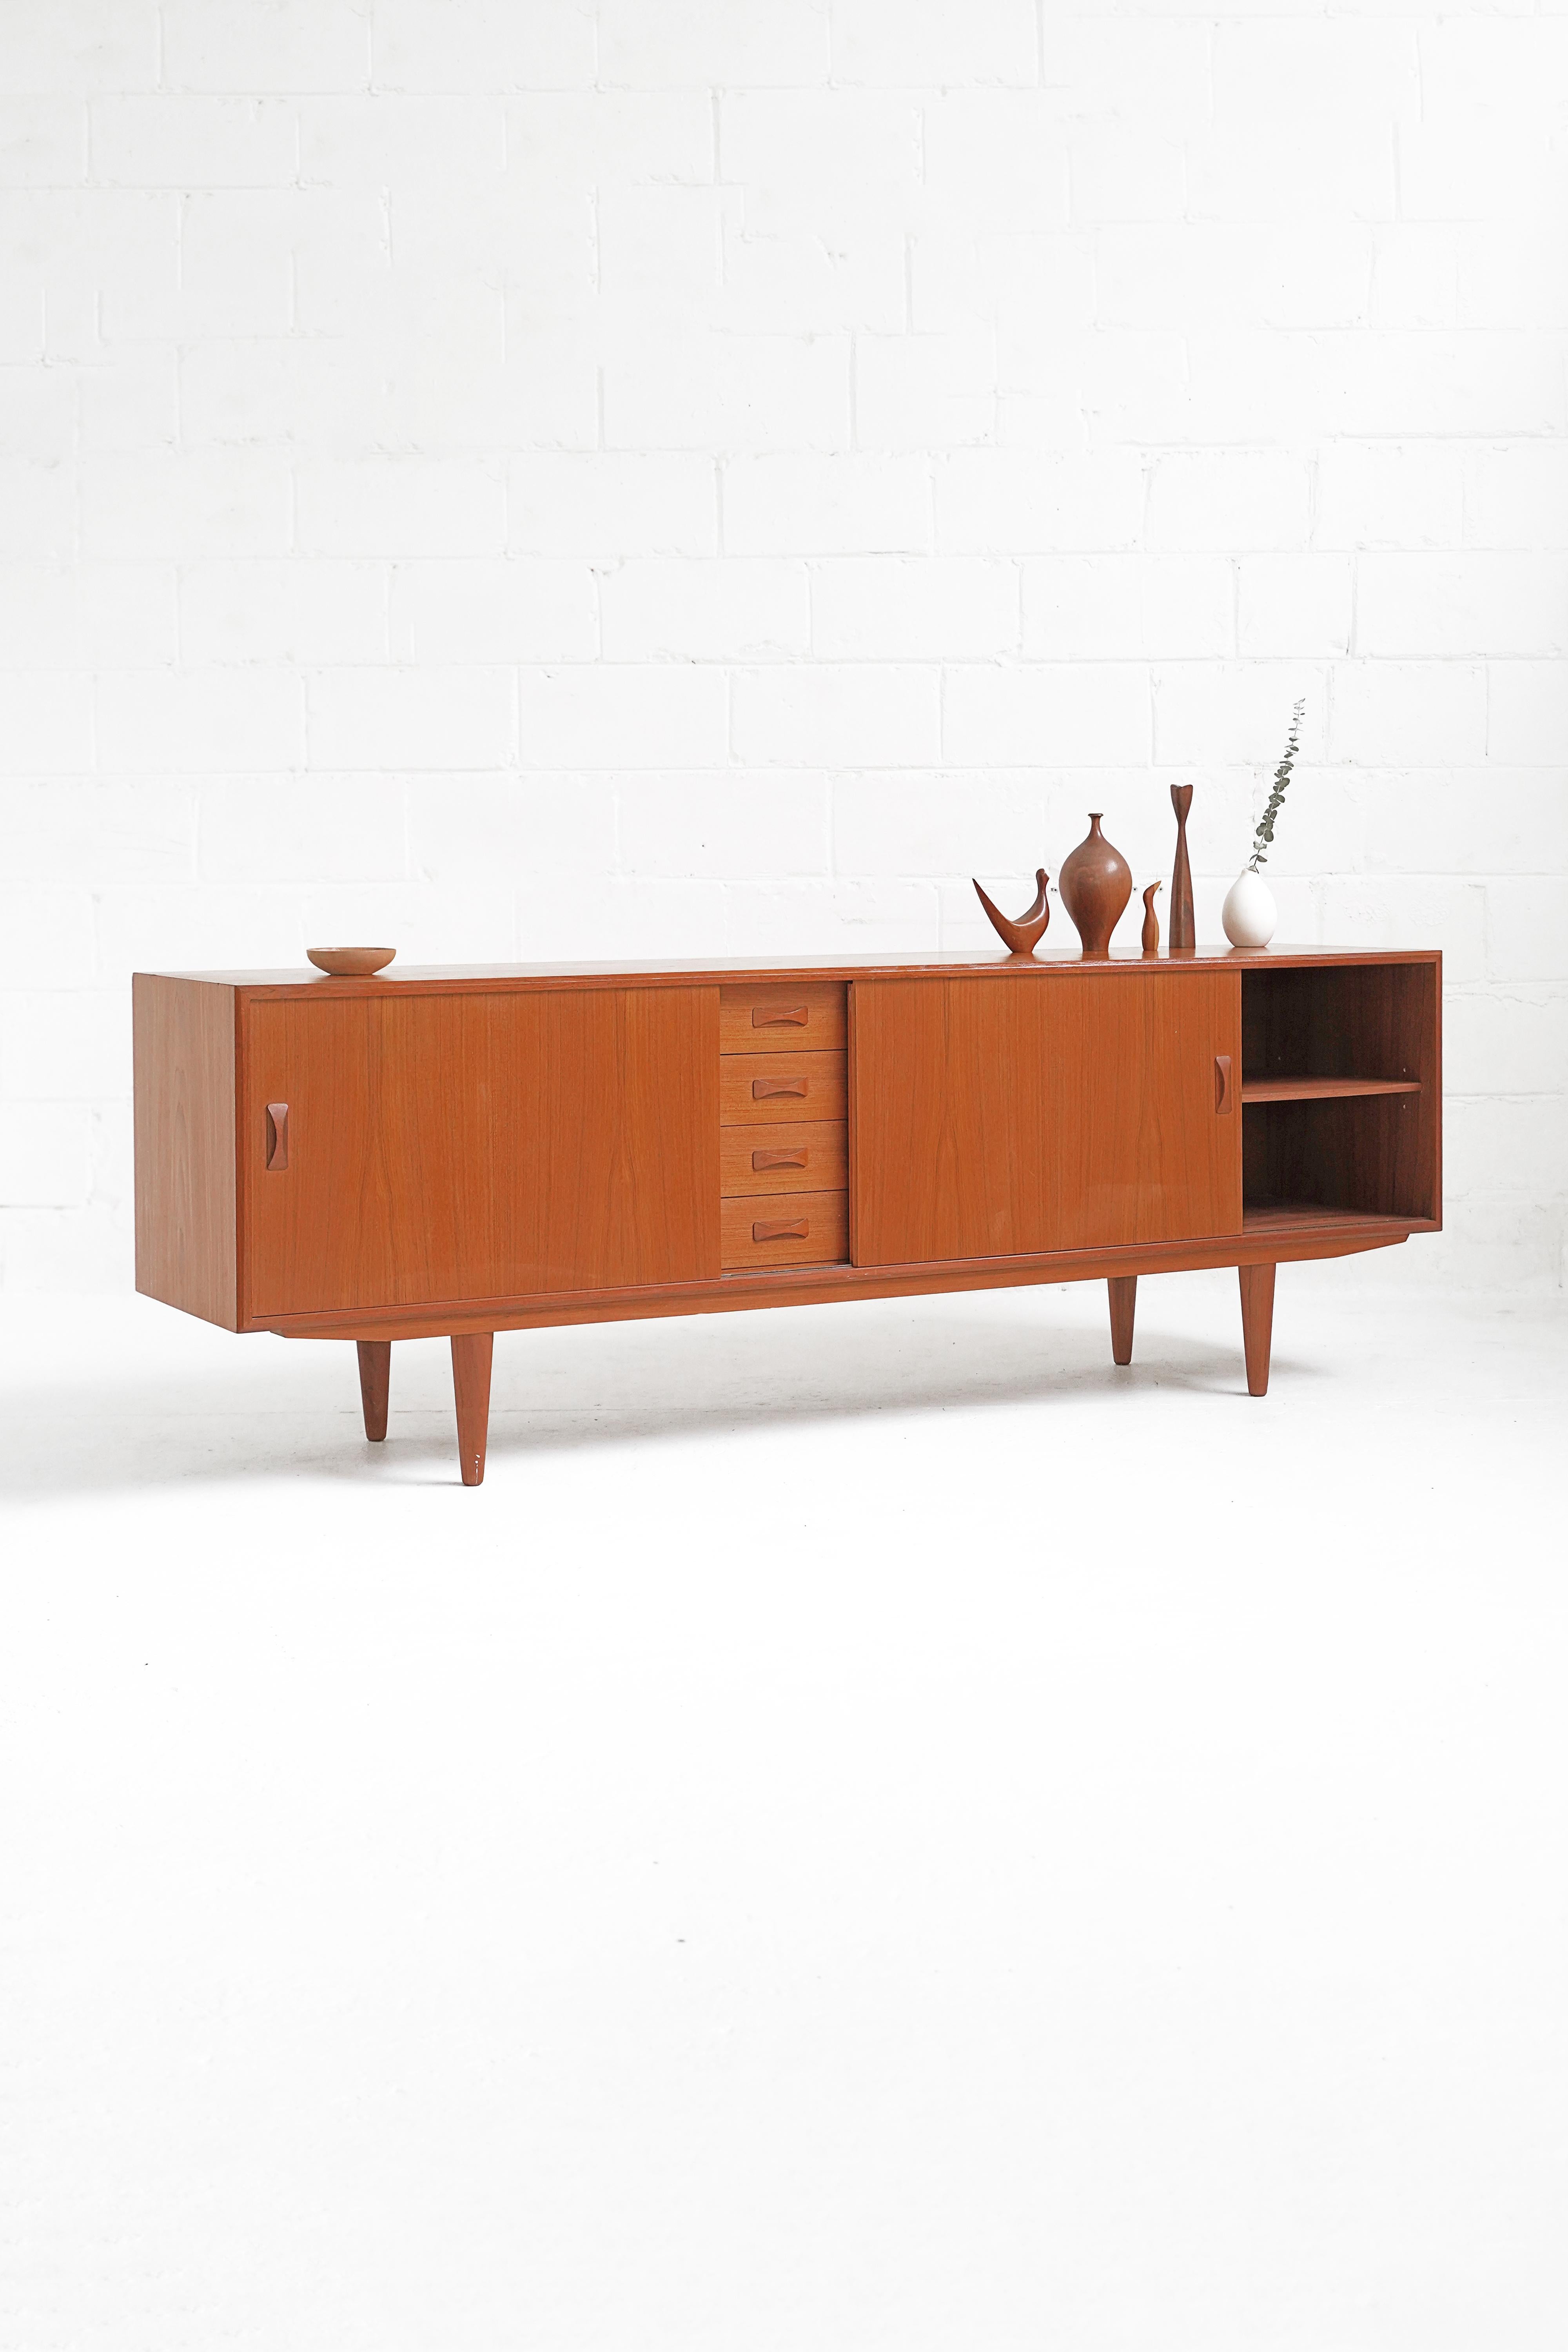 Stunning sideboard for Clausen & Søn. Overall in great vintage condition with minor wear. Scratching on top and veneer chipping in corner shown in photos.